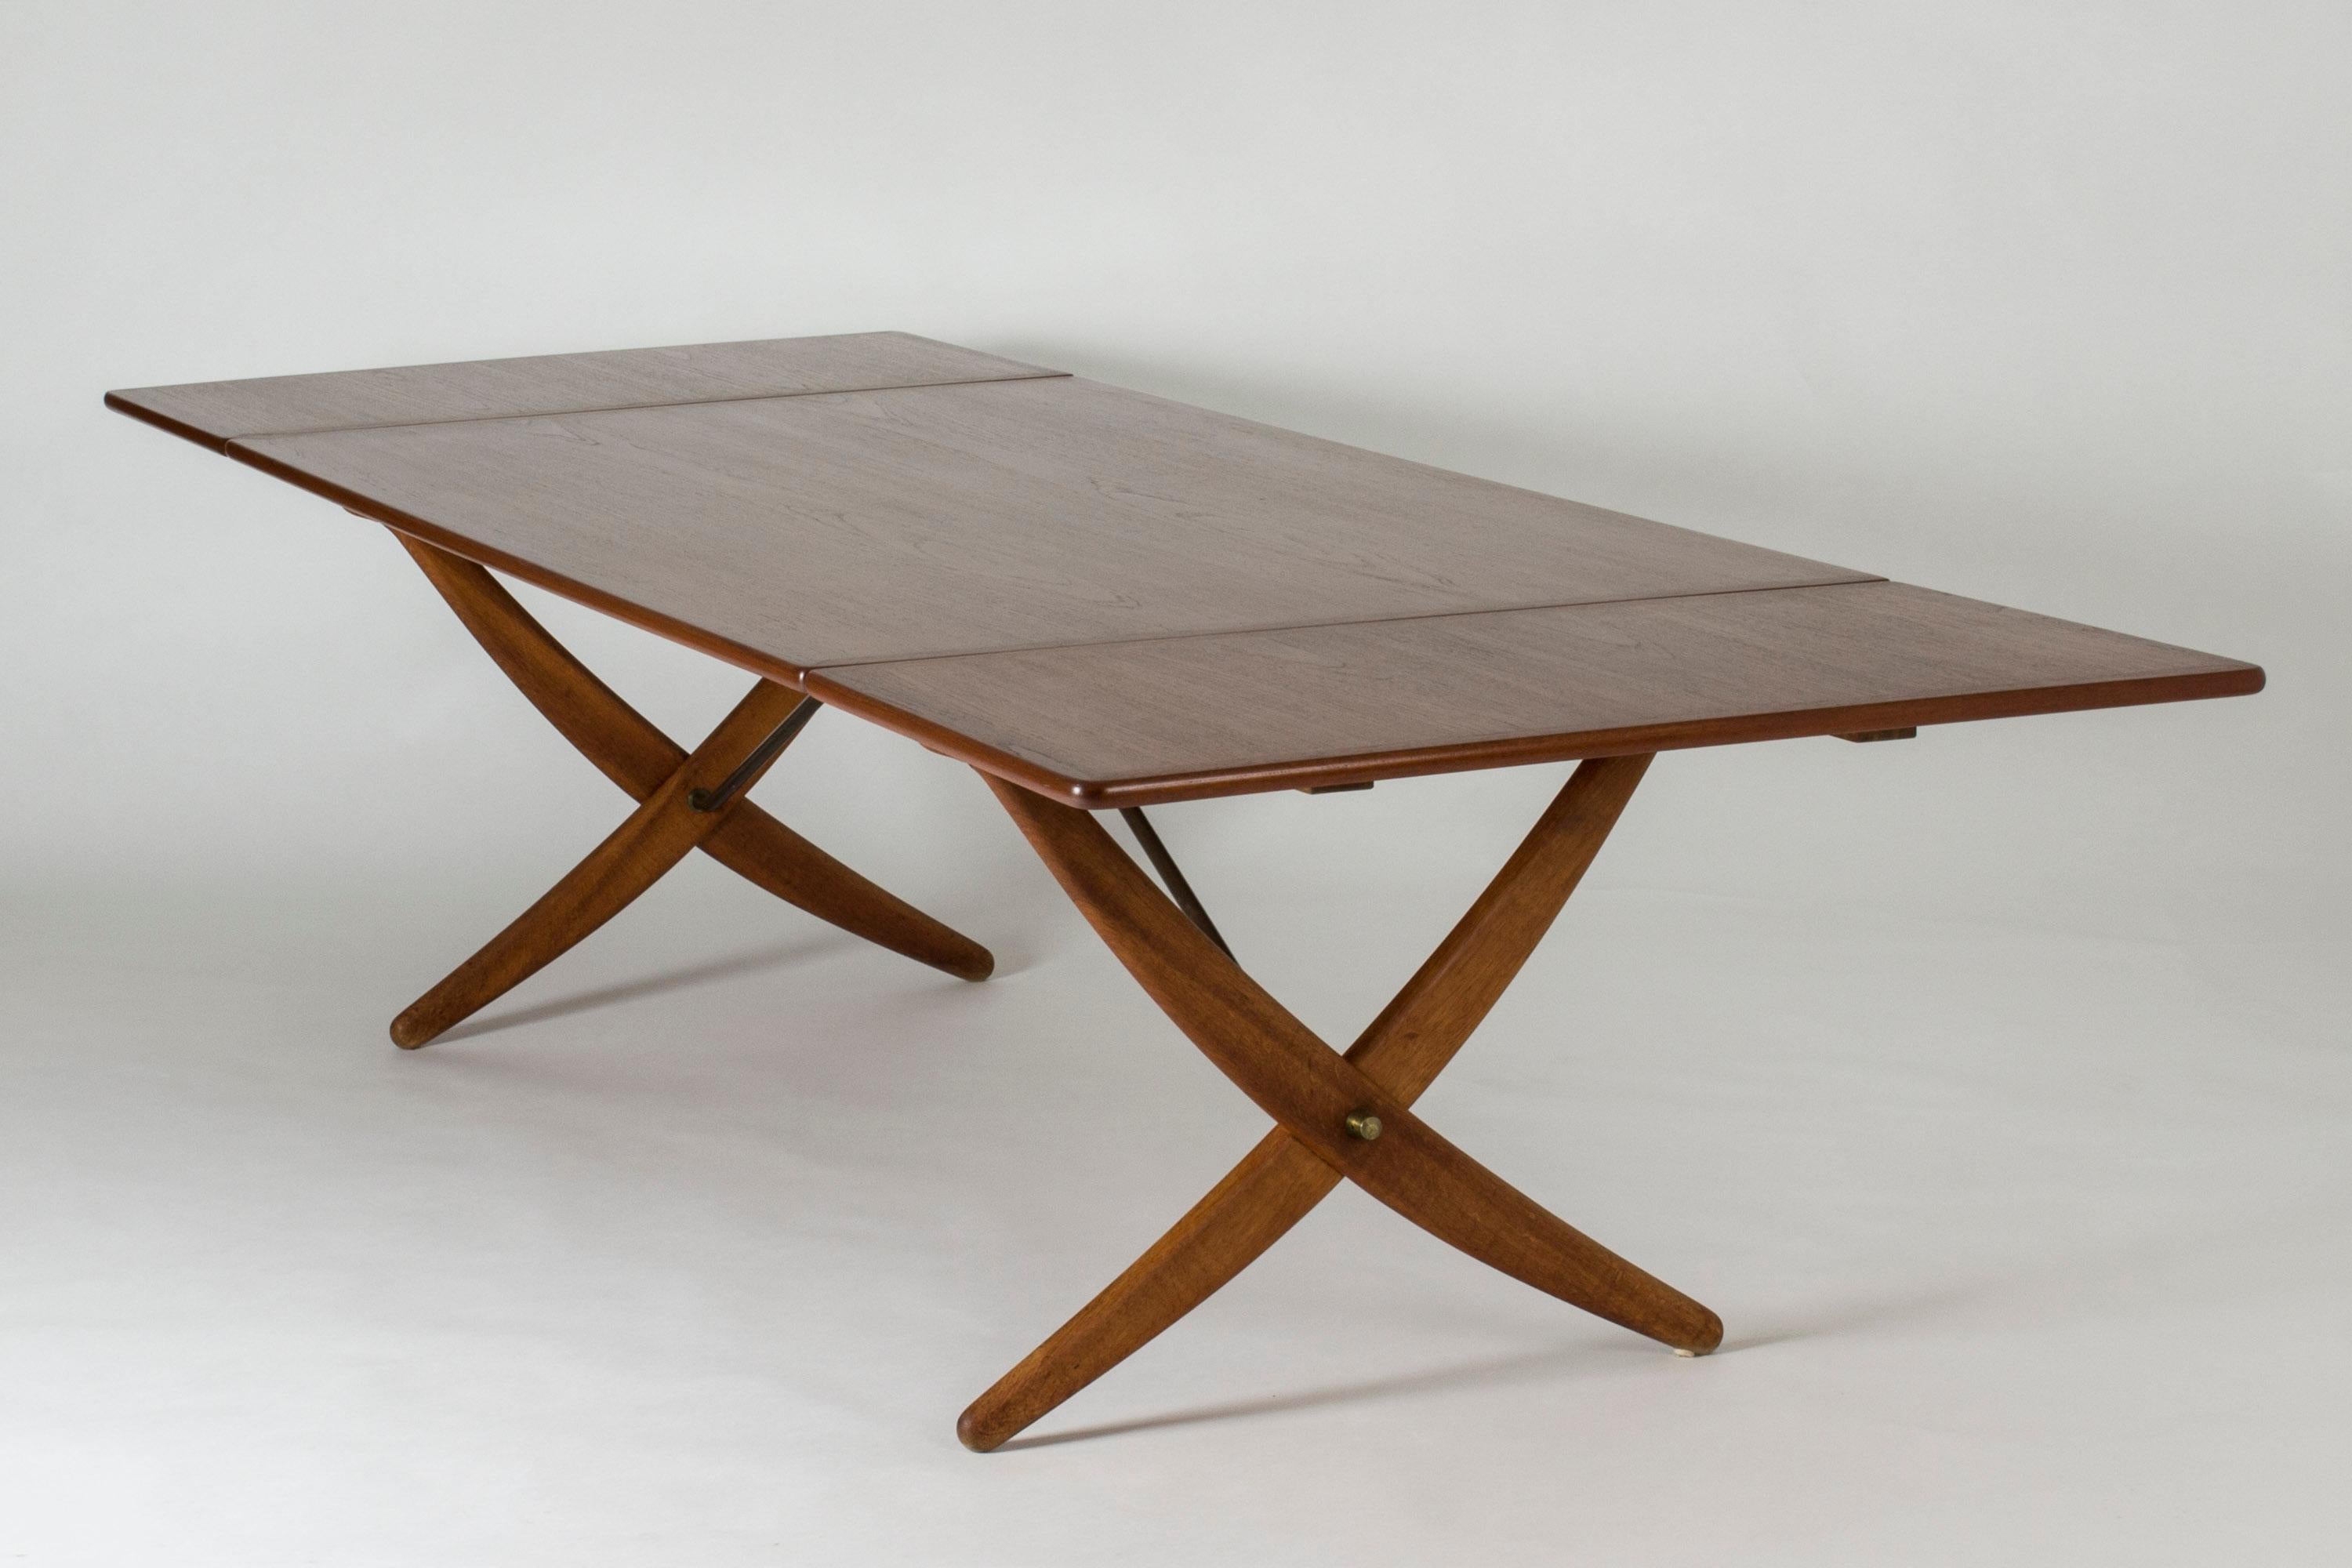 Stunning “Sabre leg” dining table by Hans J. Wegner with teak table top and beech legs. Excellent construction with brass extenders holding up the drop leaves steadily. The brass extenders form a beautiful addition to the design.

Width when